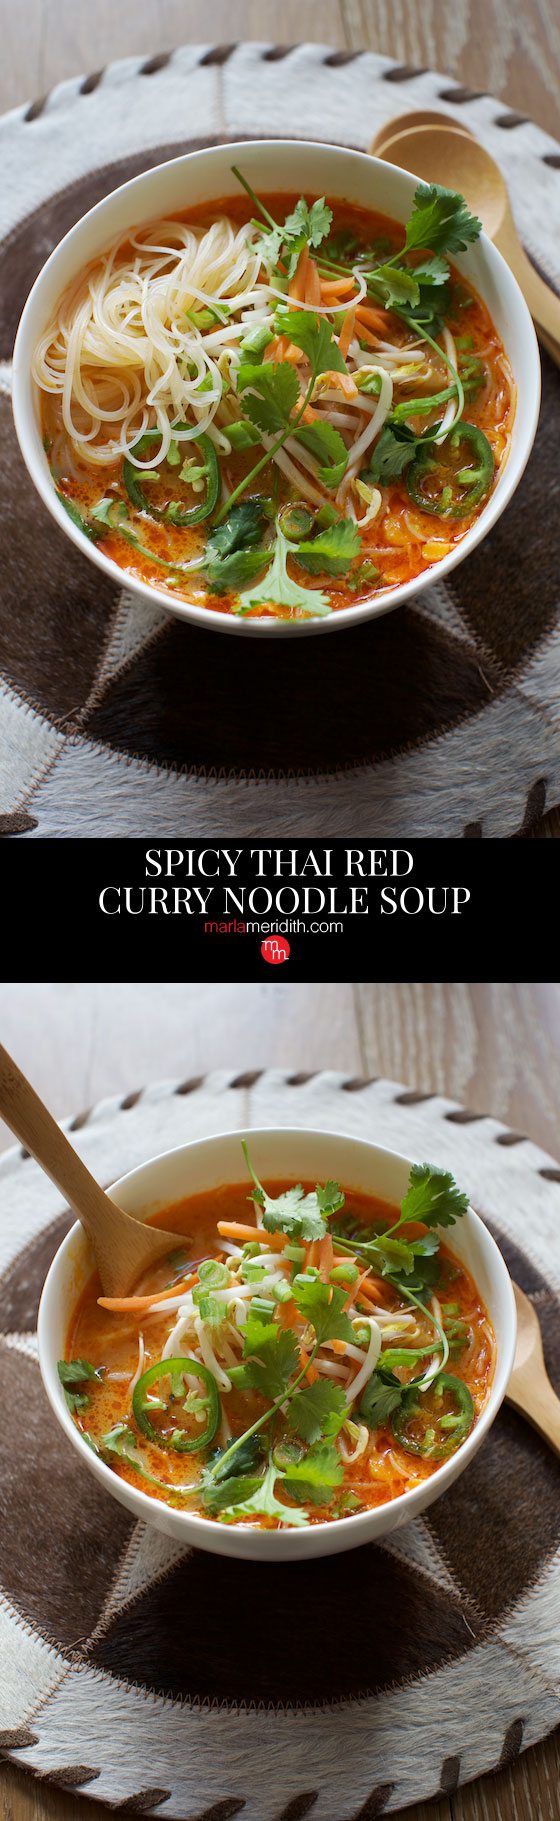 Spicy Thai Red Curry Noodle Soup #recipe. Best #soup you will ever eat! Kid approved too. #vegan #glutenfree MarlaMeridith.com ( @marlameridith )